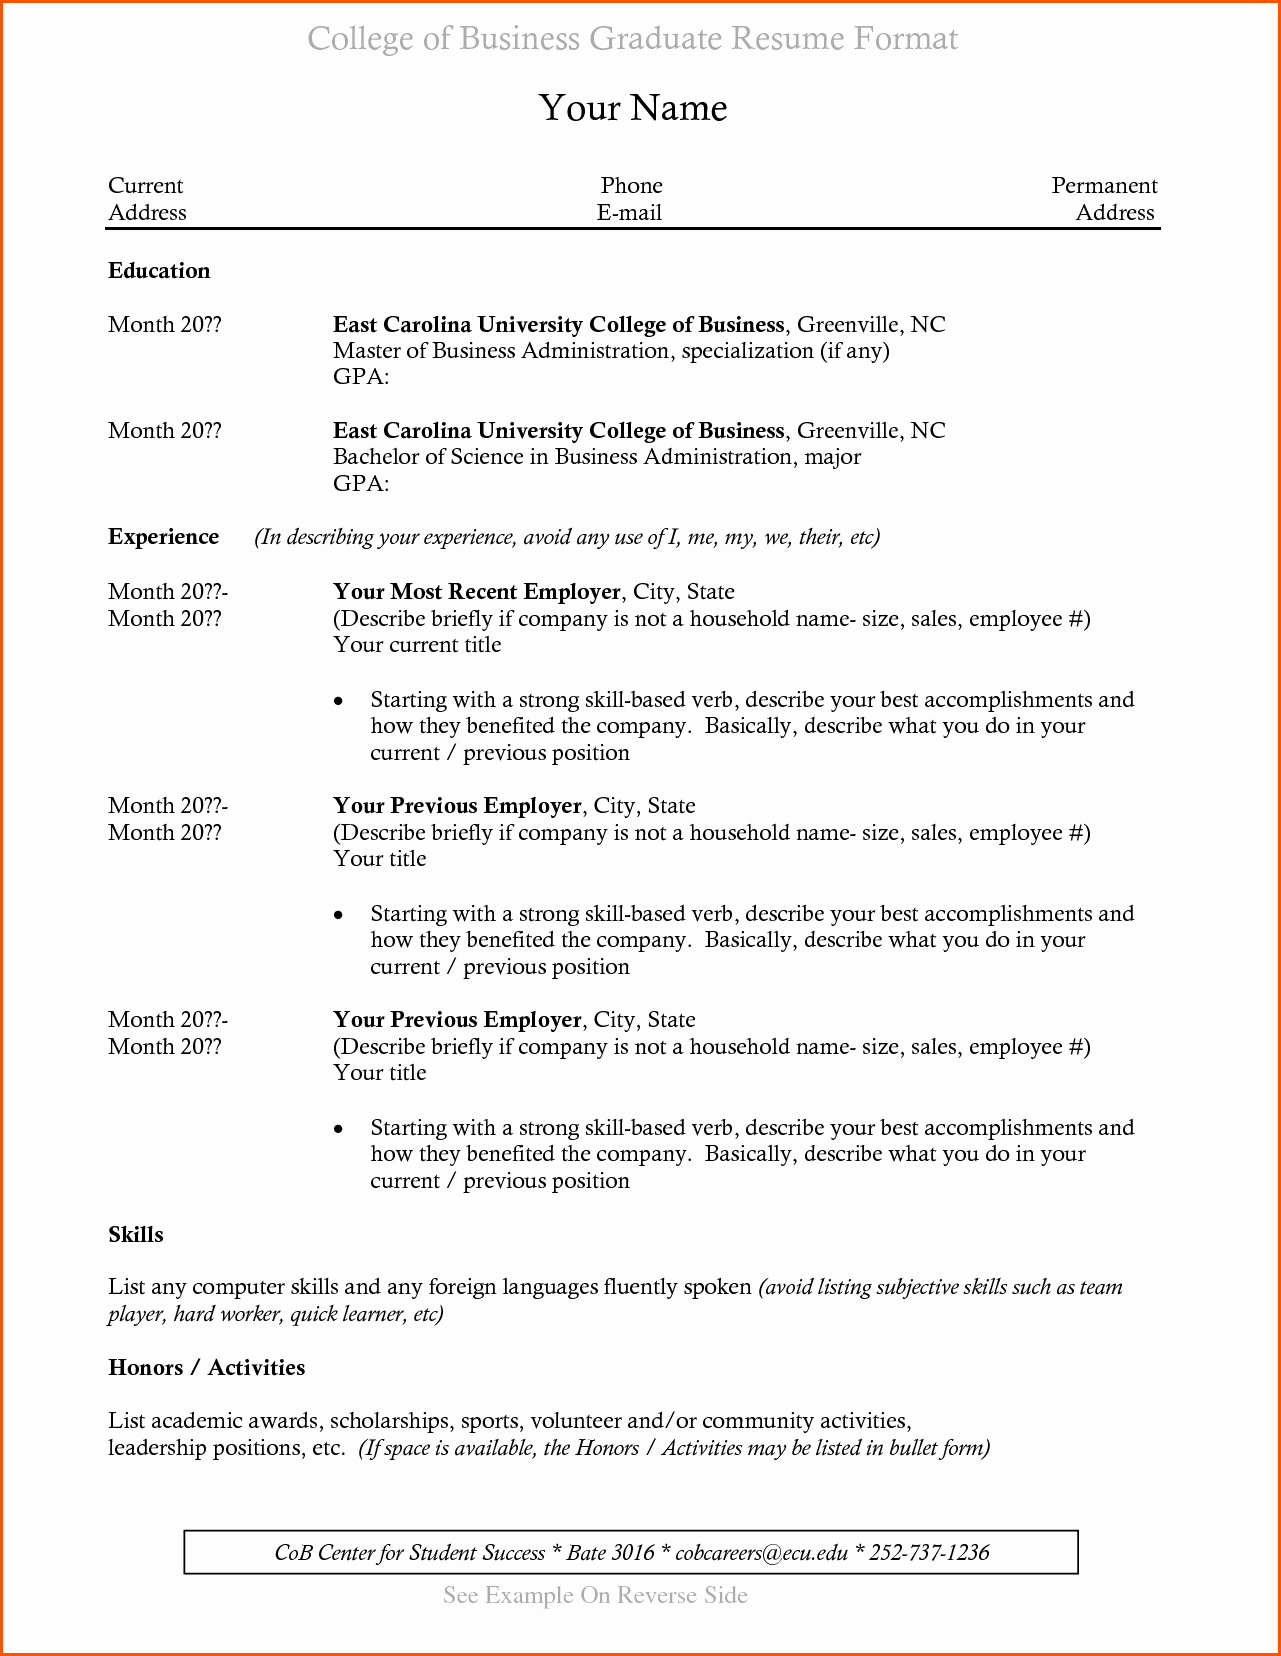 Resume for Recent College Grads Inspirational Resumes for College Graduates with No Experience